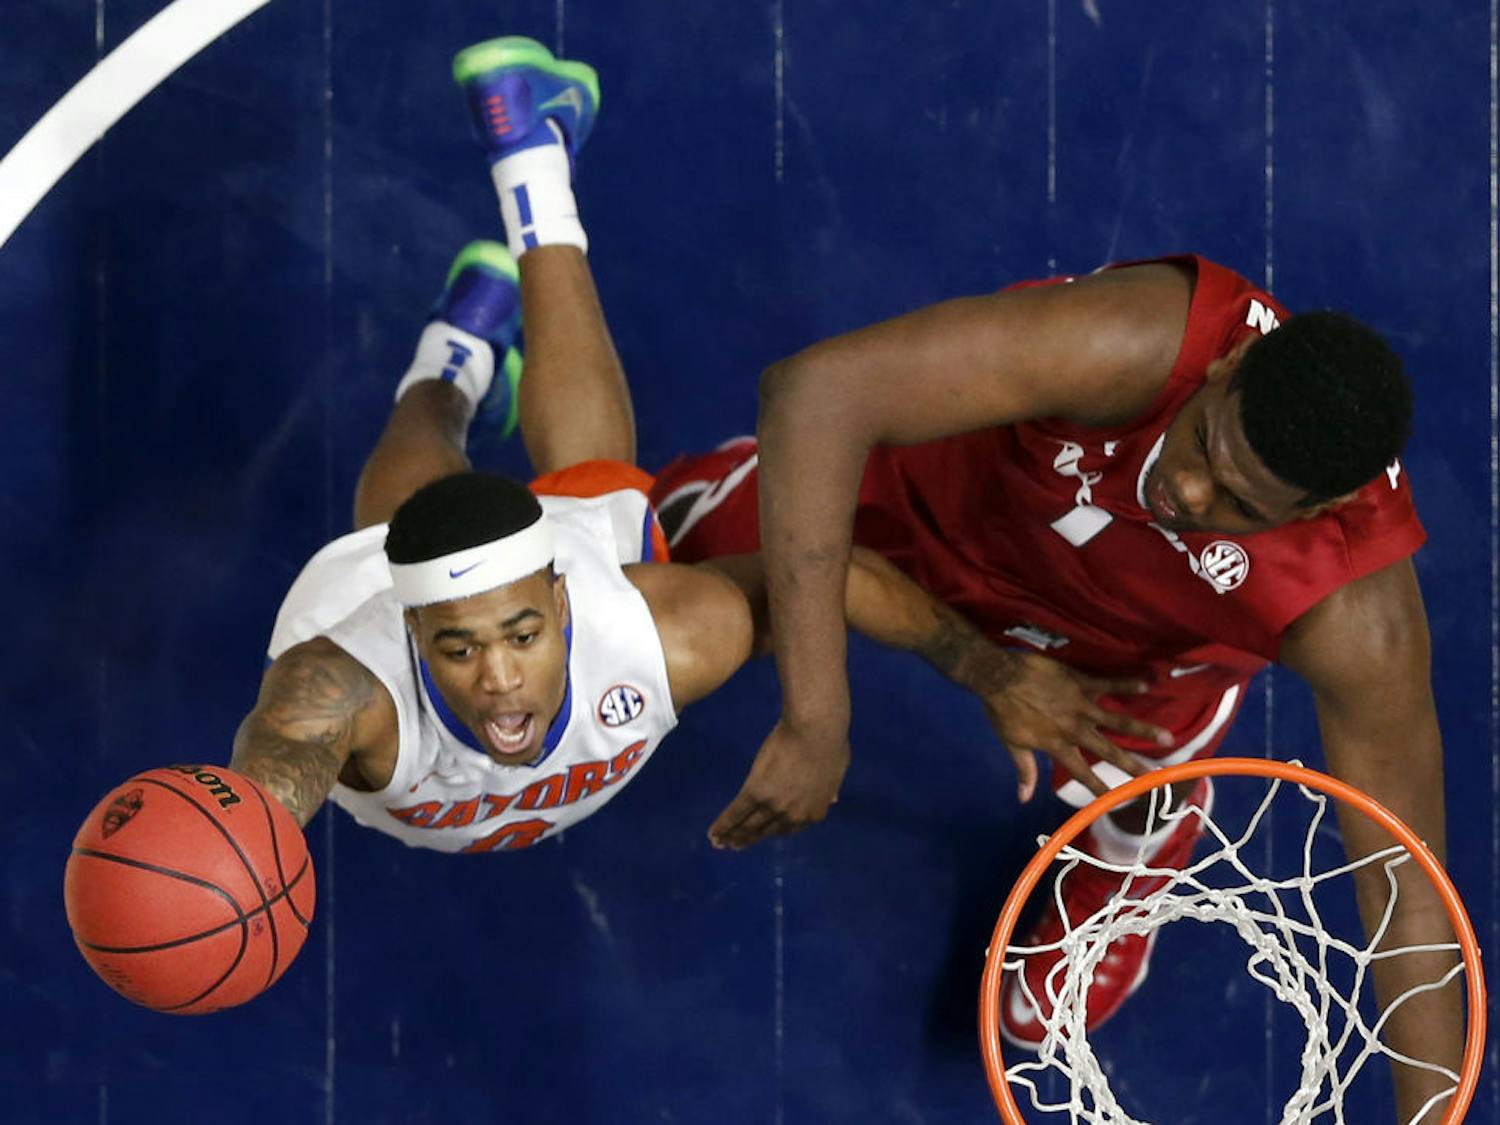 Florida's Kasey Hill, left, drives to the basket against Arkansas's Trey Thompson, right, during the first half of an NCAA college basketball game in the Southeastern Conference tournament in Nashville, Tenn., Thursday, March 10, 2016. (AP Photo/John Bazemore)Florida won 68-61.